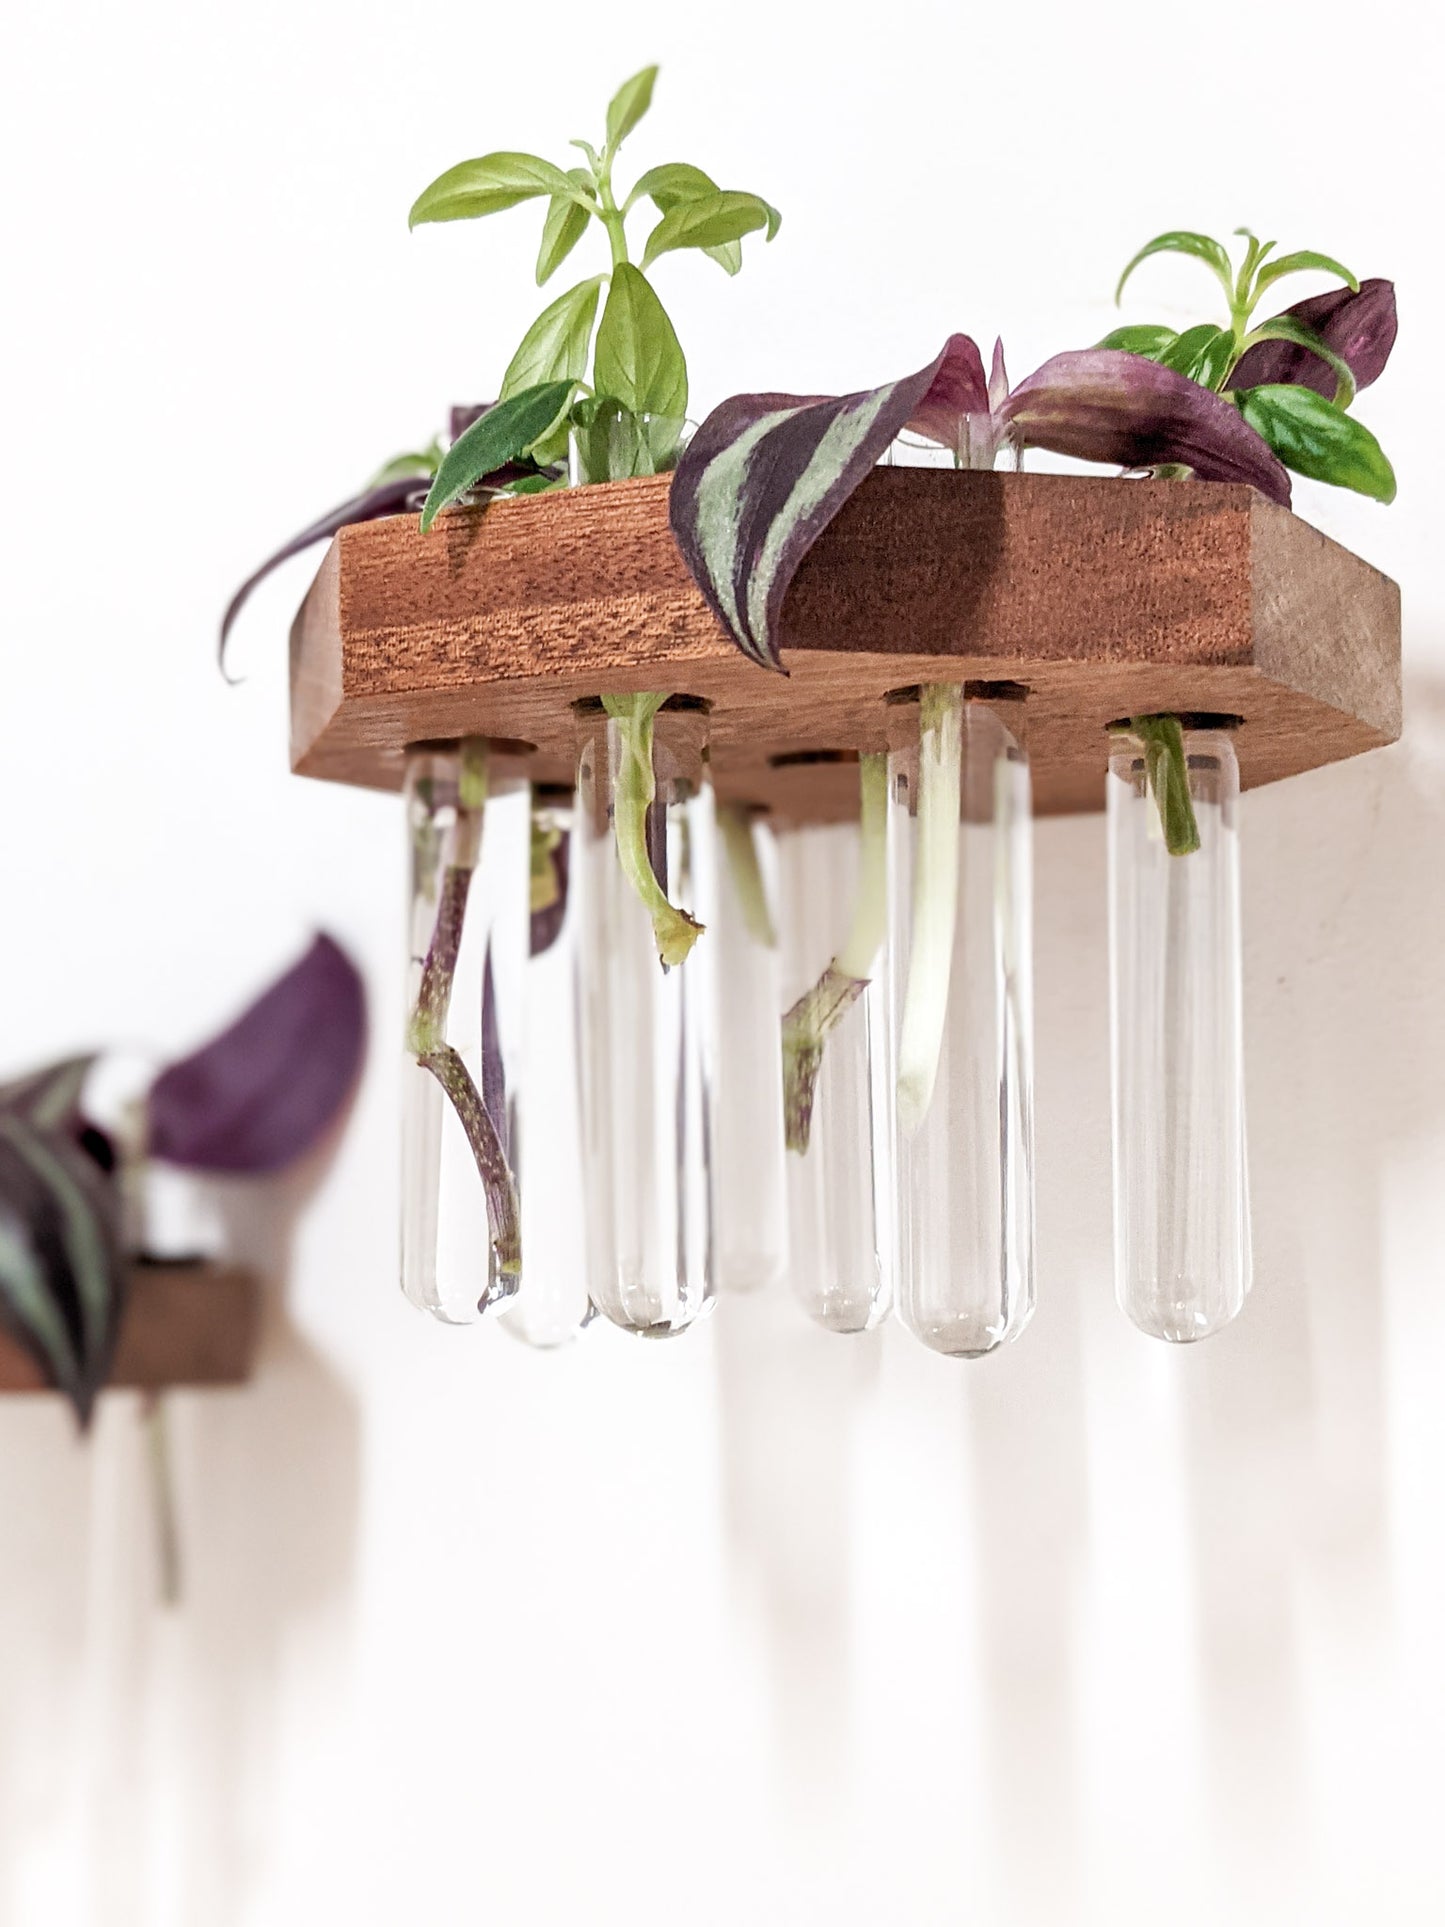 Five glass test tubes hang from a mahogany octagon wall-mounted propagation station. Wandering Jew cuttings are placed in the test tubes and their purple and green leaves drape over the sharp edges of the octagon.